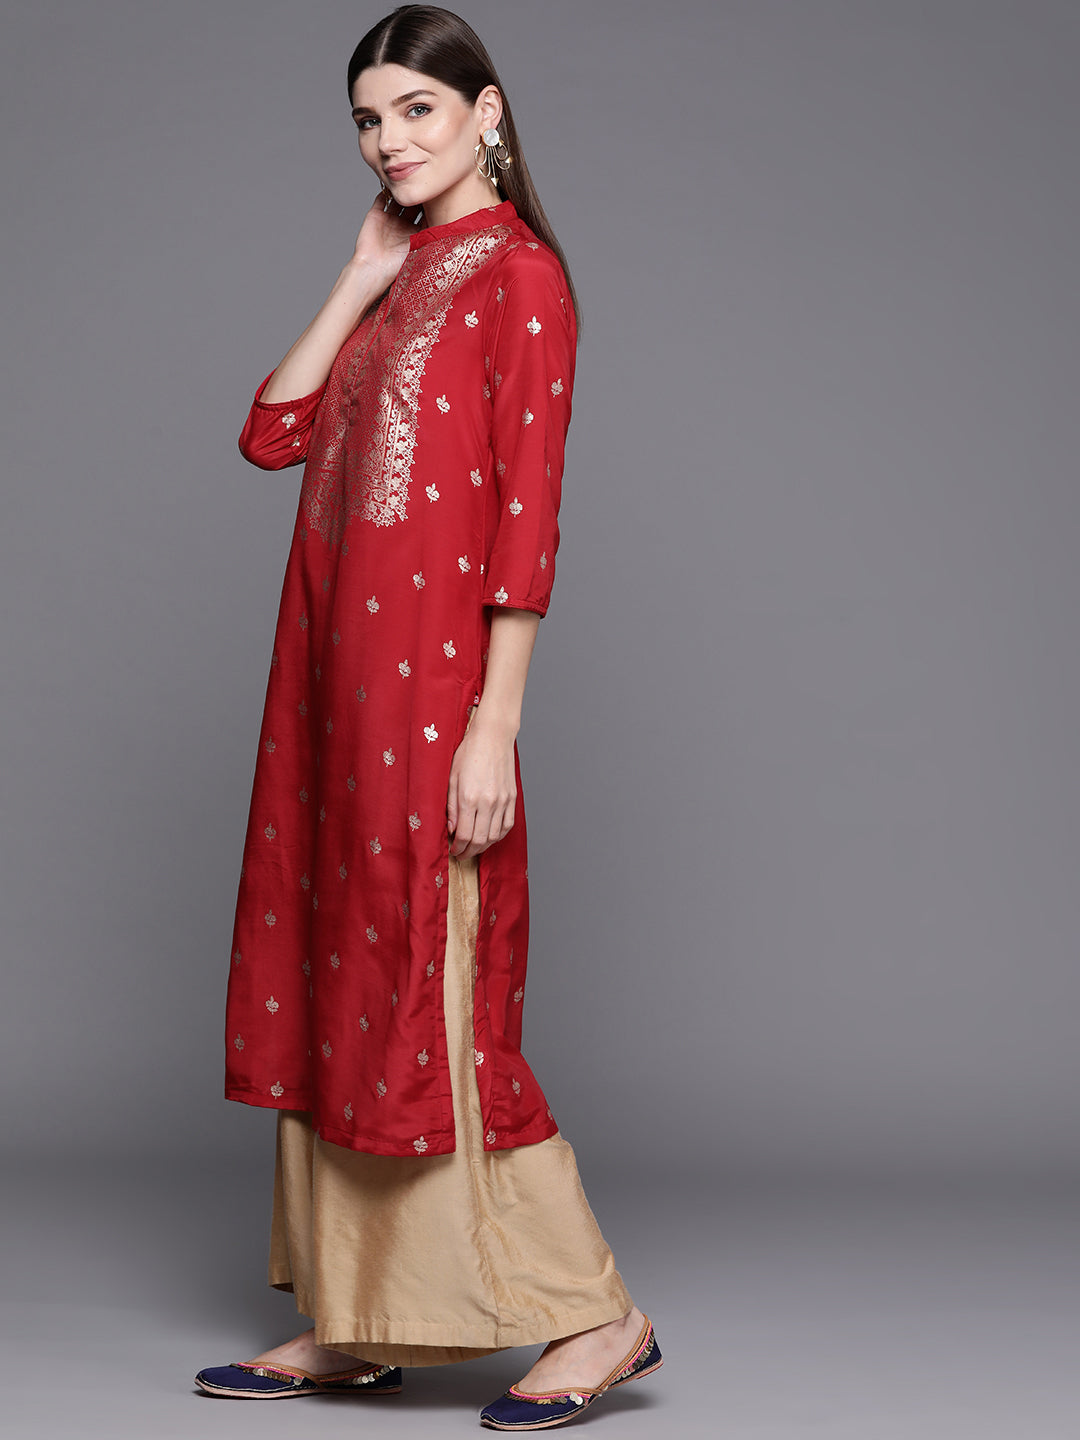 New arrivals in Kurtis & Tops and Ethnic Indian wear for women and Latest  Kurtis & Tops at Biba India